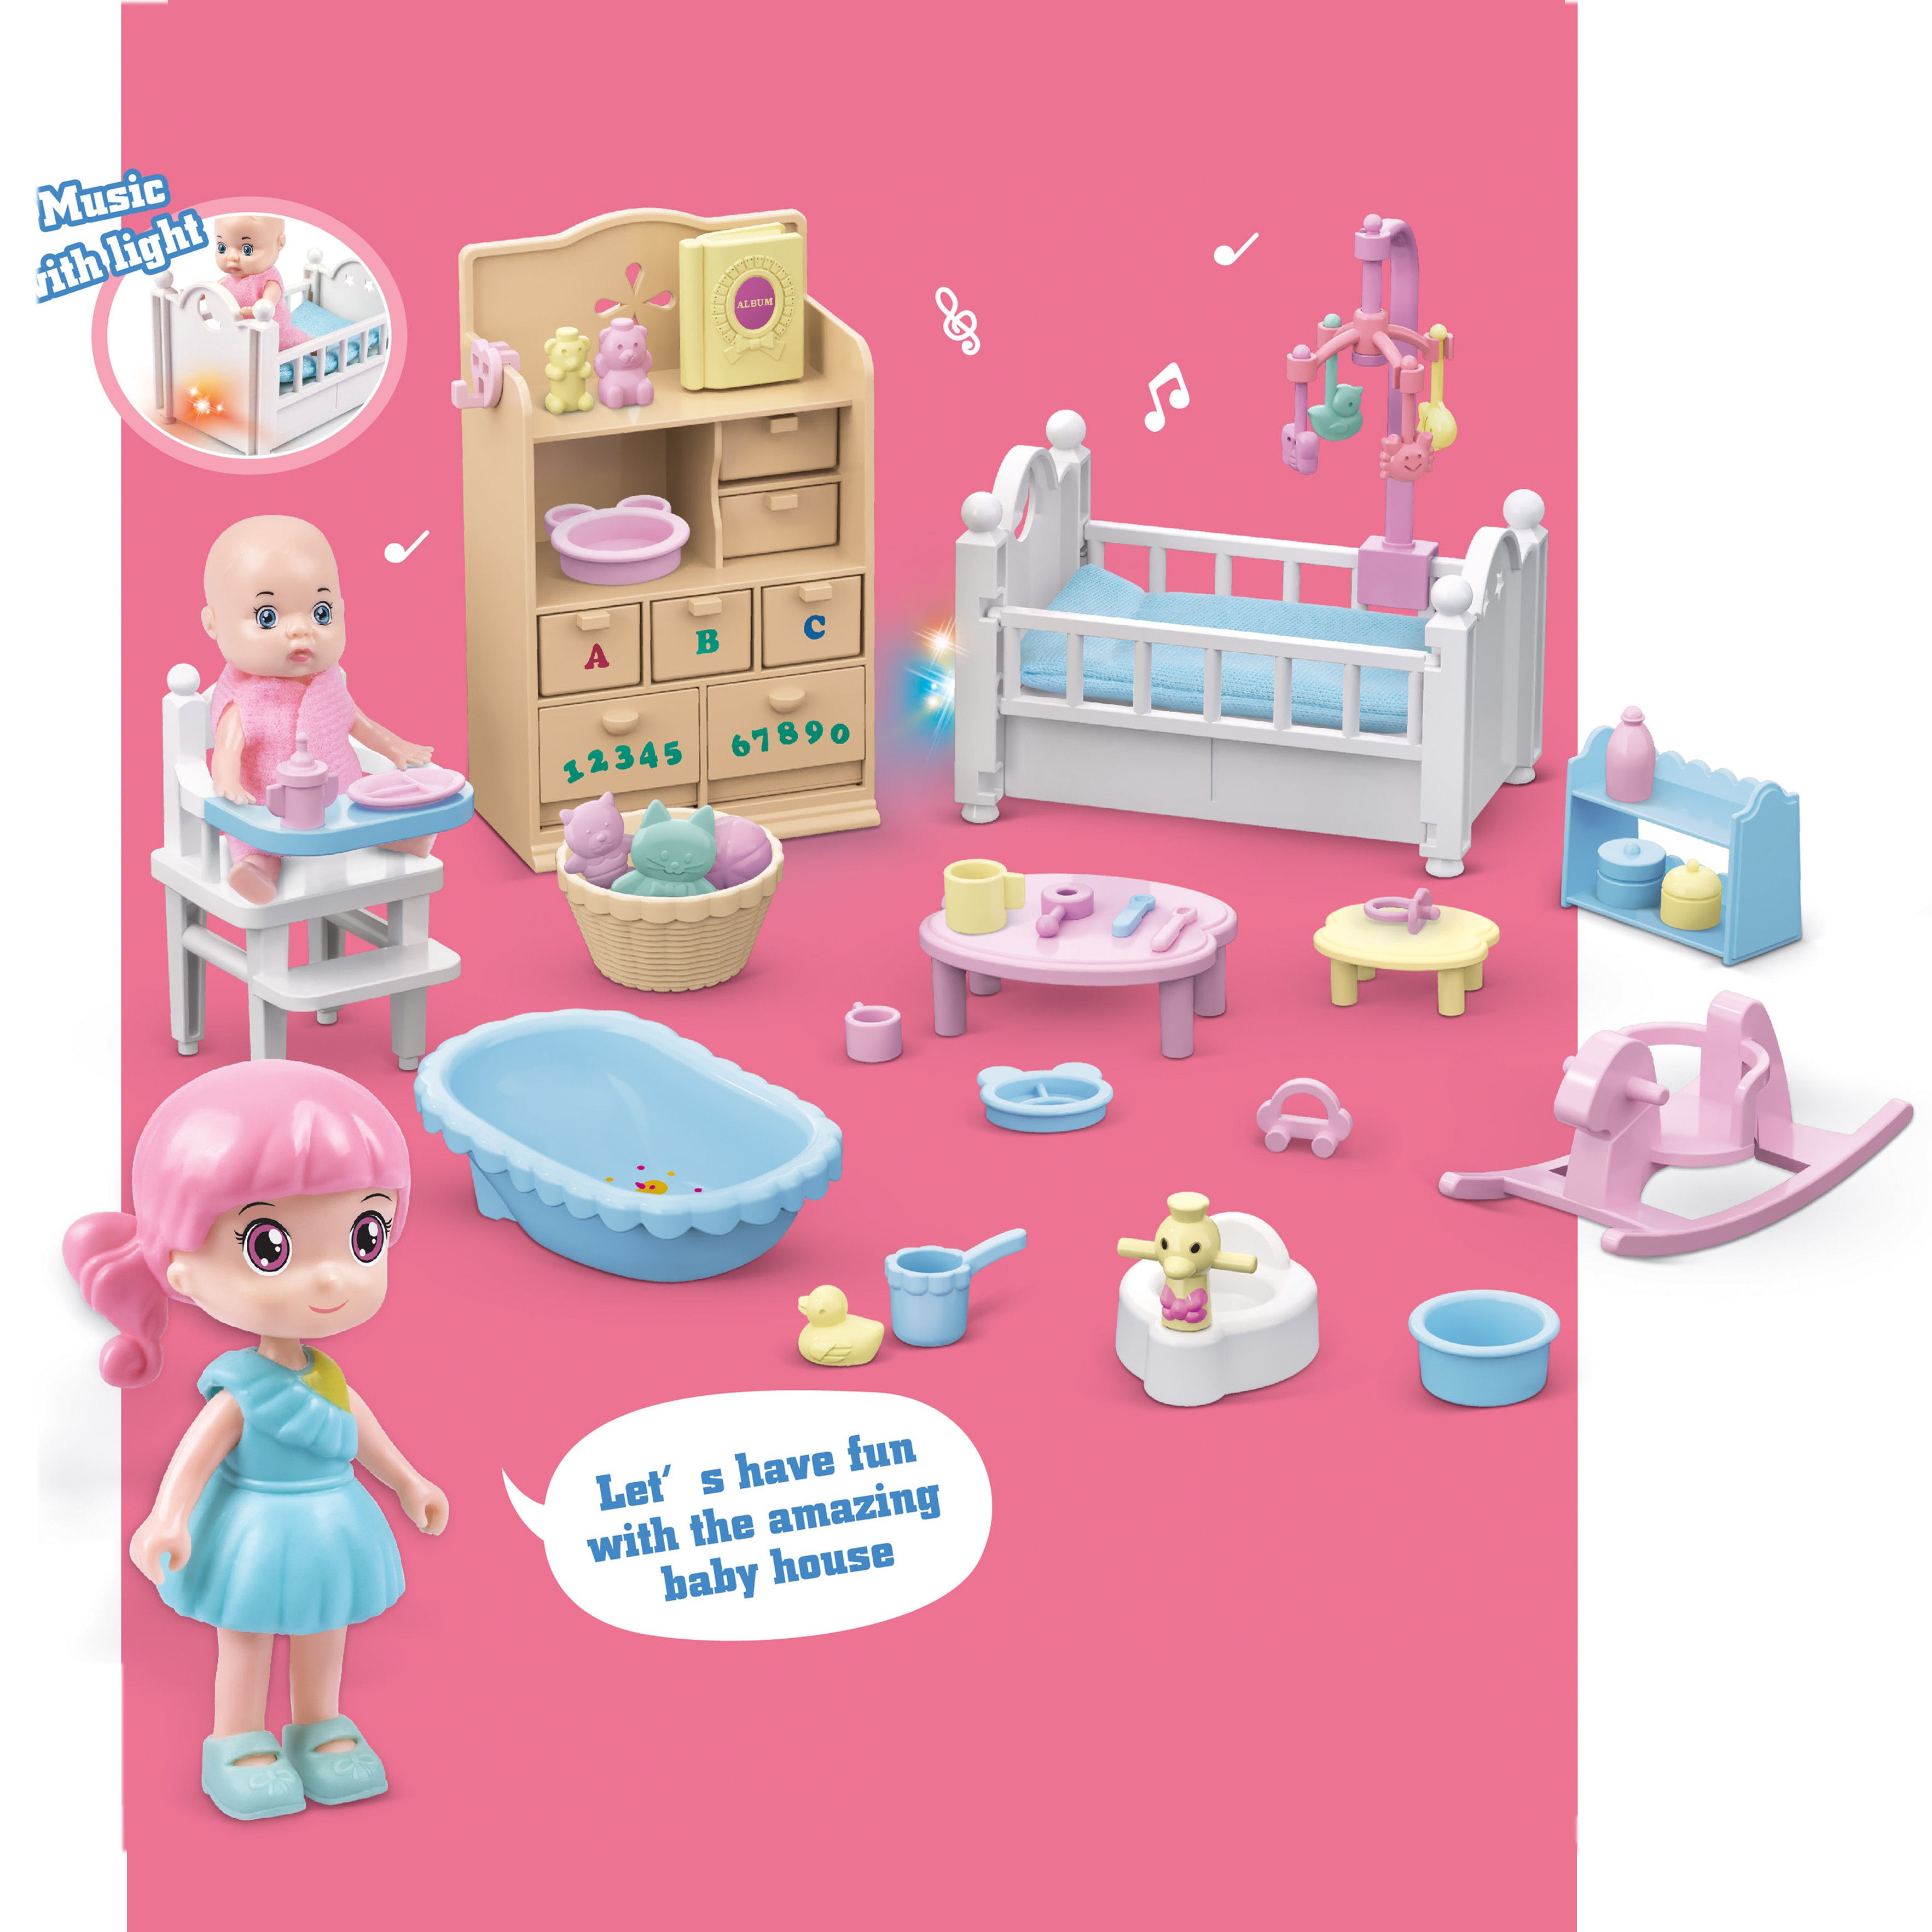 Doll house furniture, baby house